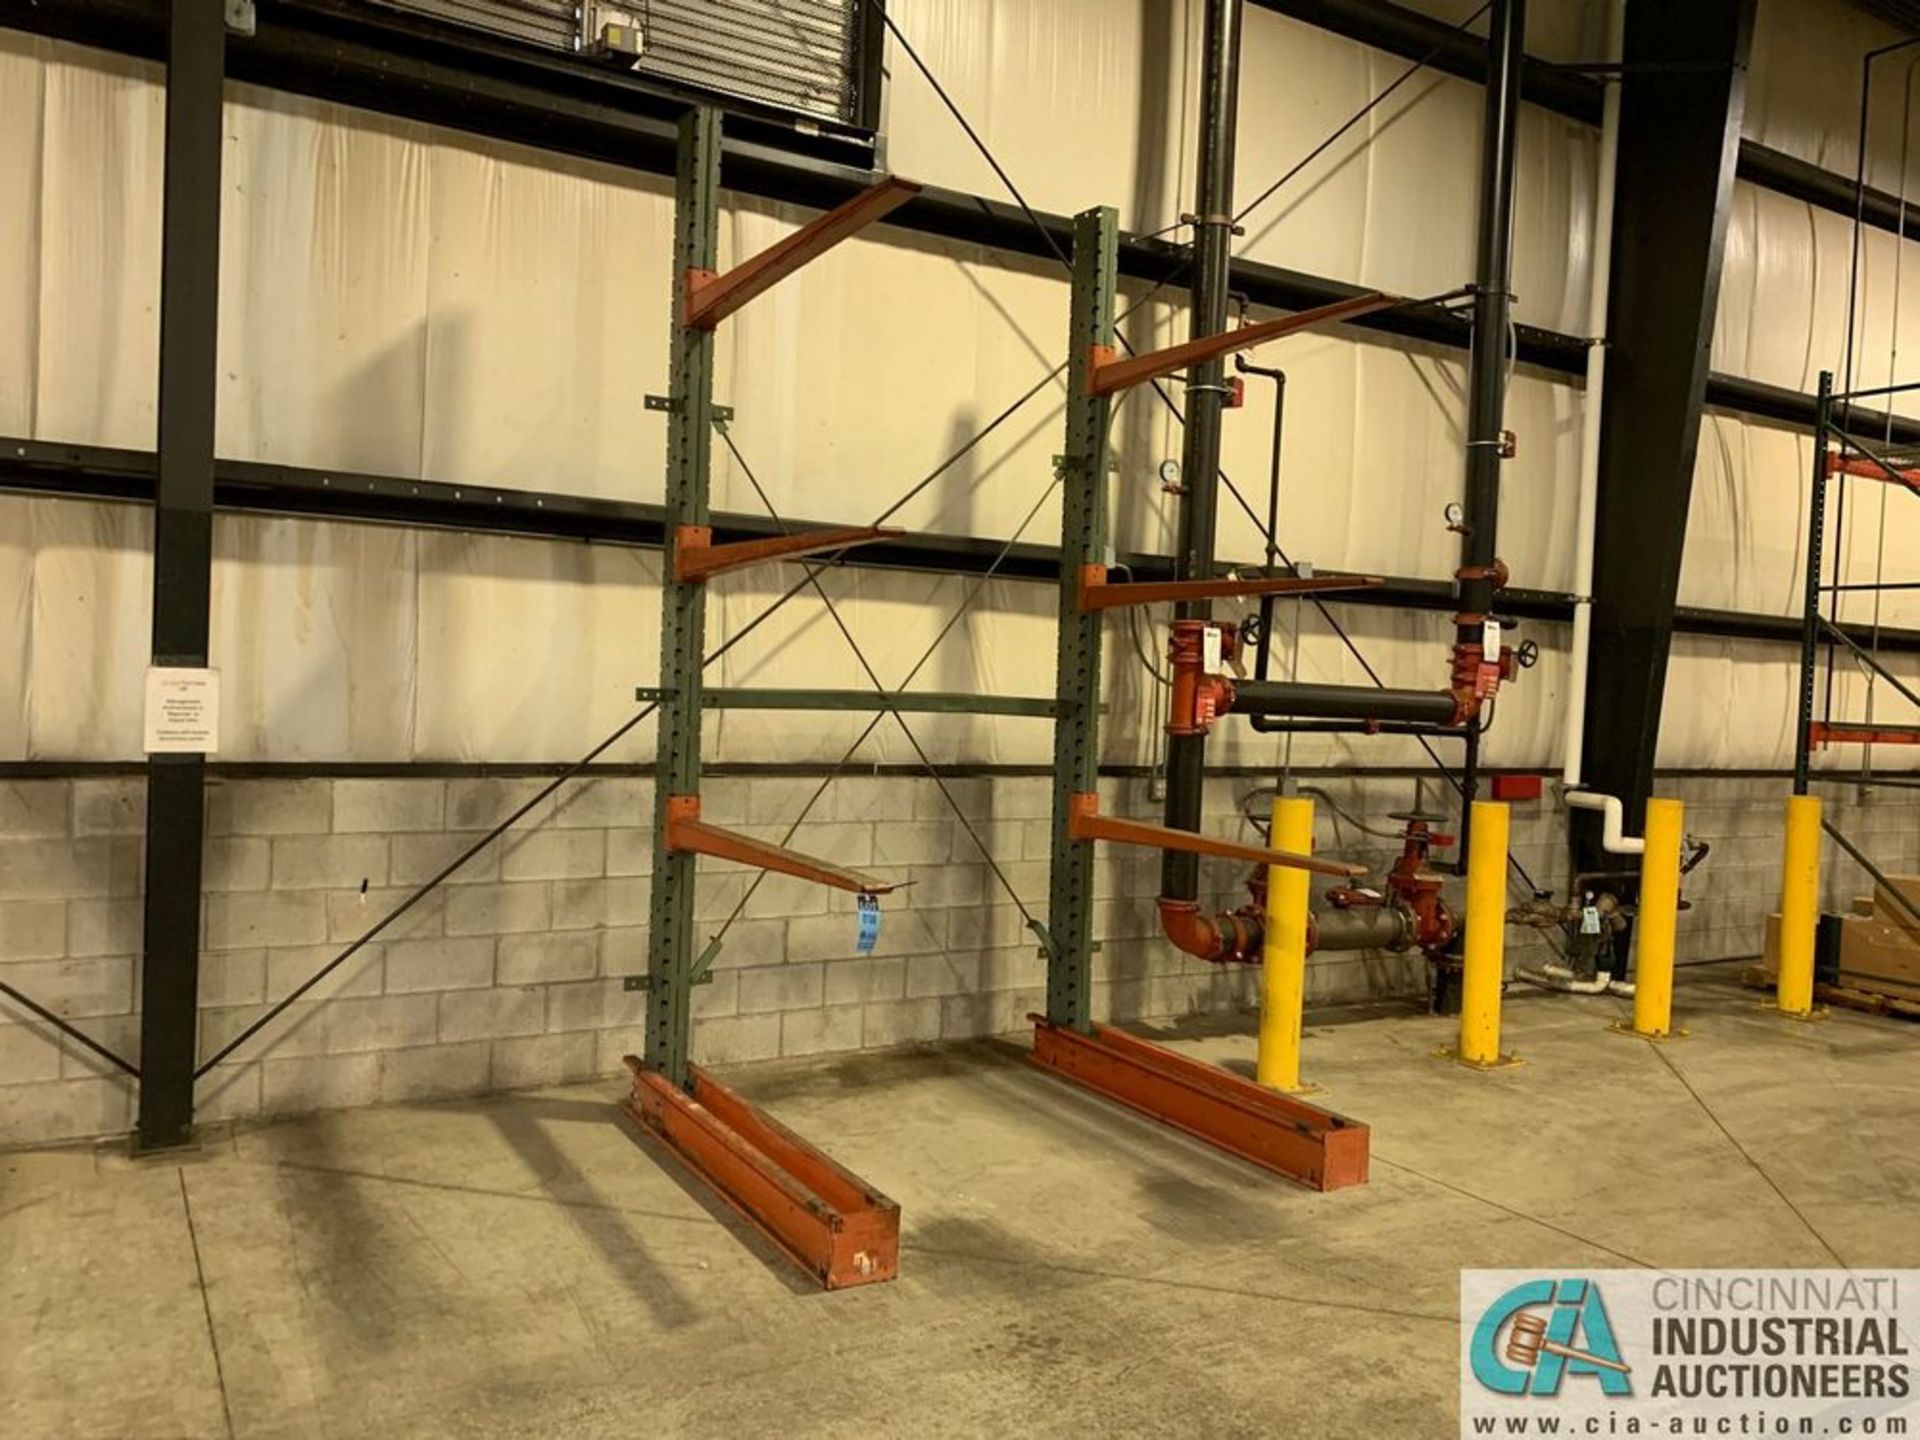 SECTION CANTILEVER RACK; (2) 144" UPRIGHTS, (6) 60" ARMS, (2) FLOOR BASES, FLOOR BOLTS MUST BE CUT-